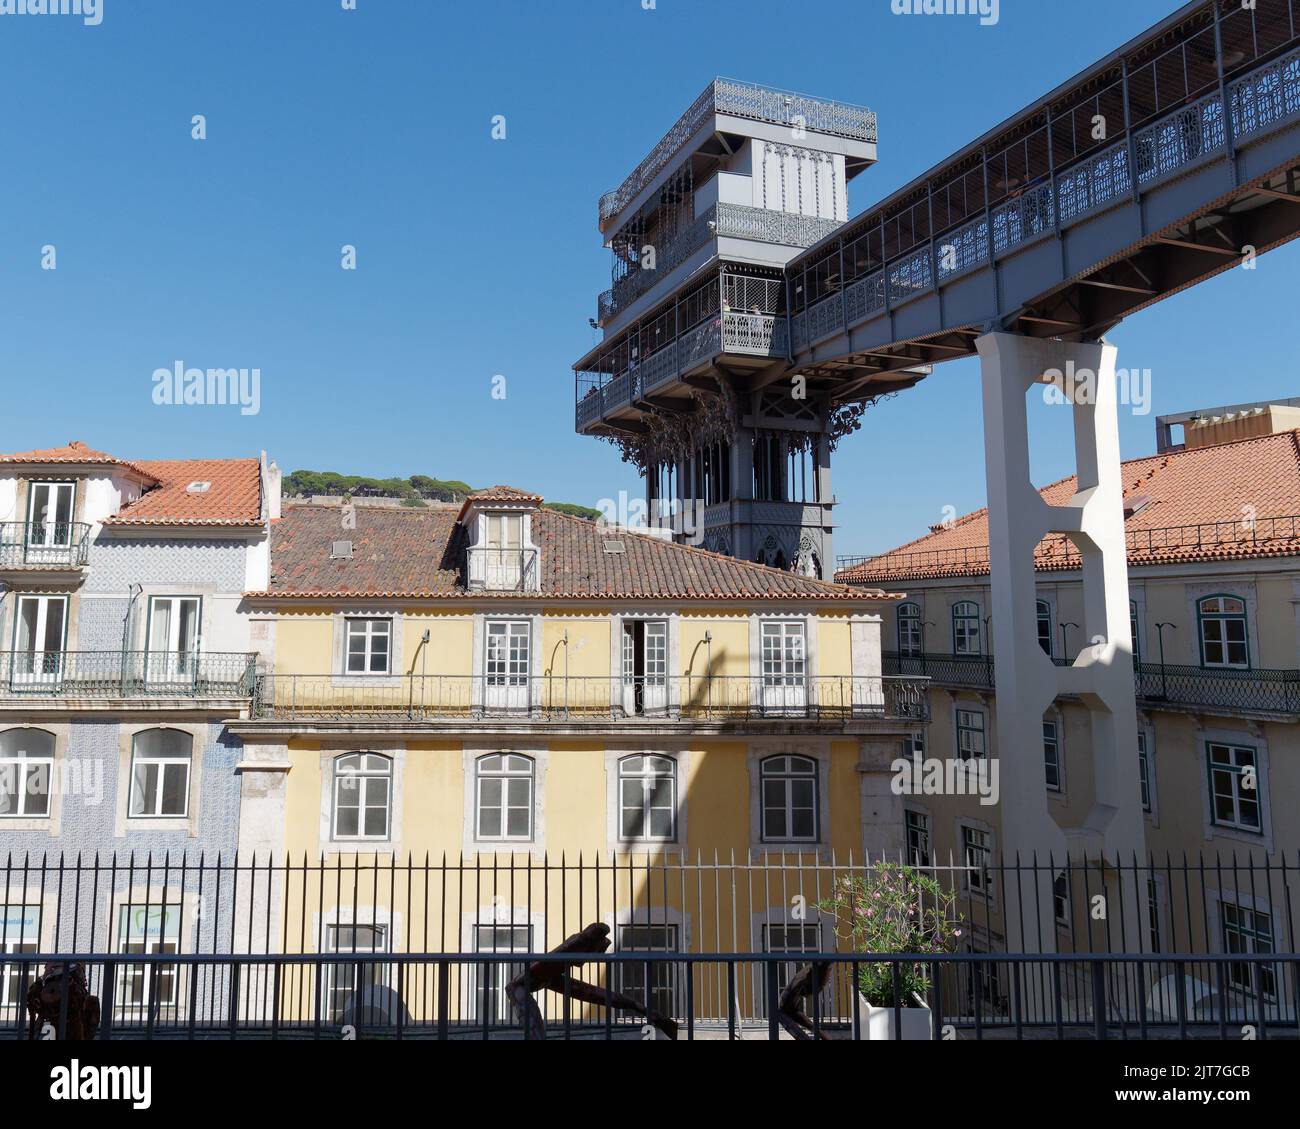 Santa Justa Lift and viewpoint with surrounding buildings in Lisbon, Portugal Stock Photo